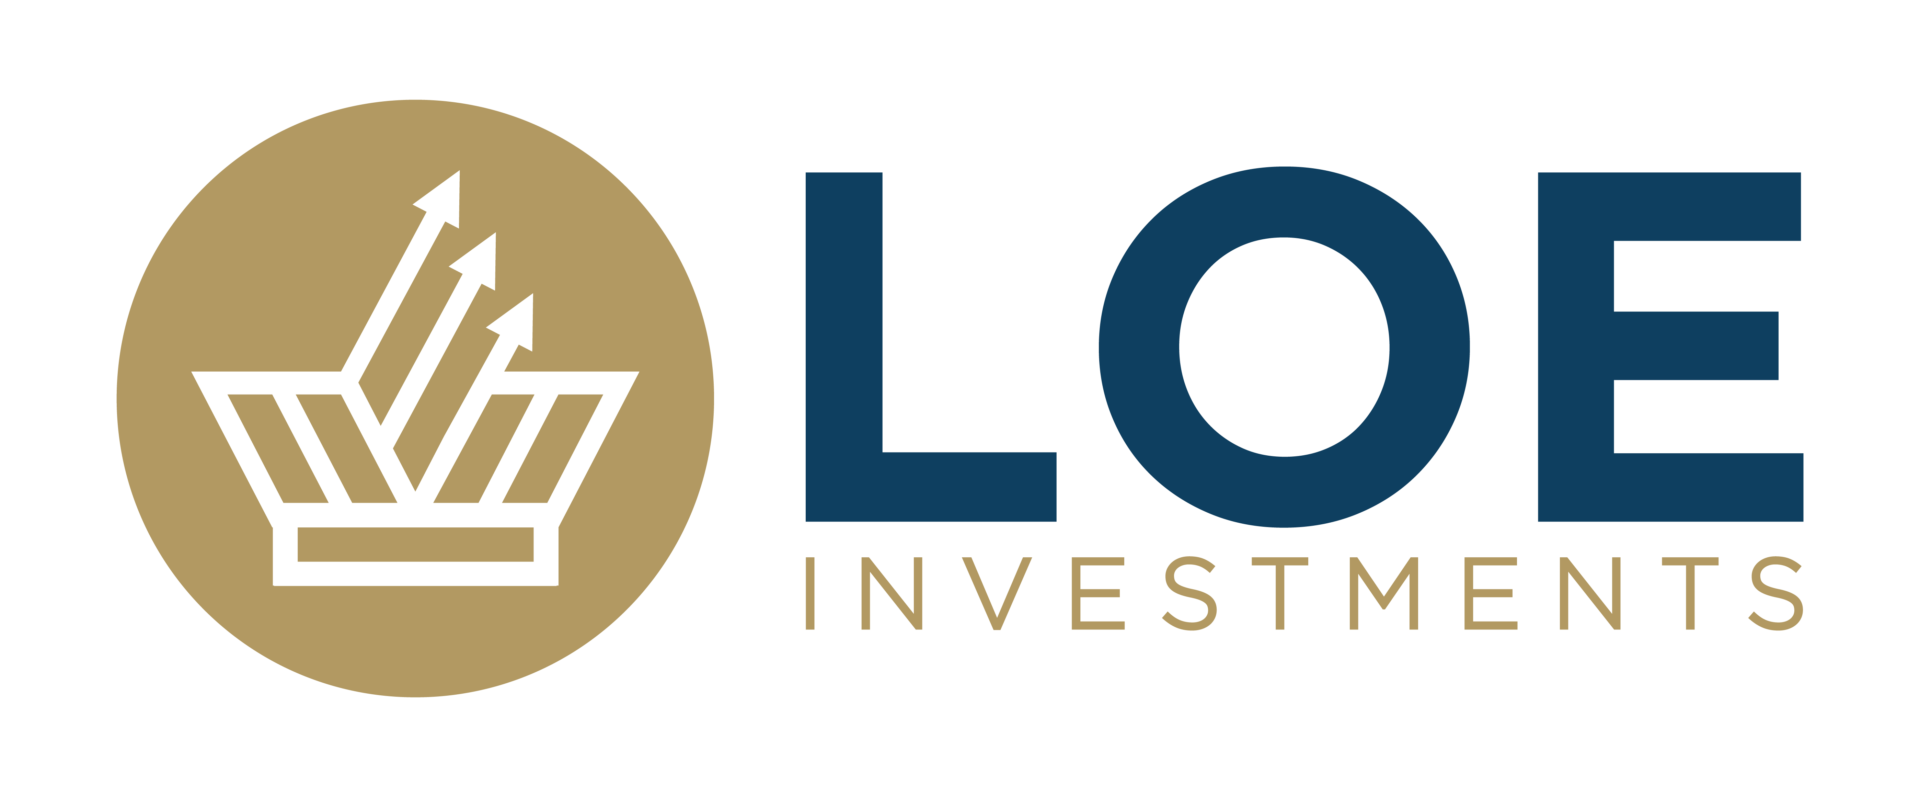 Buy and Sell Investment Properties | LOE Investments LLC logo